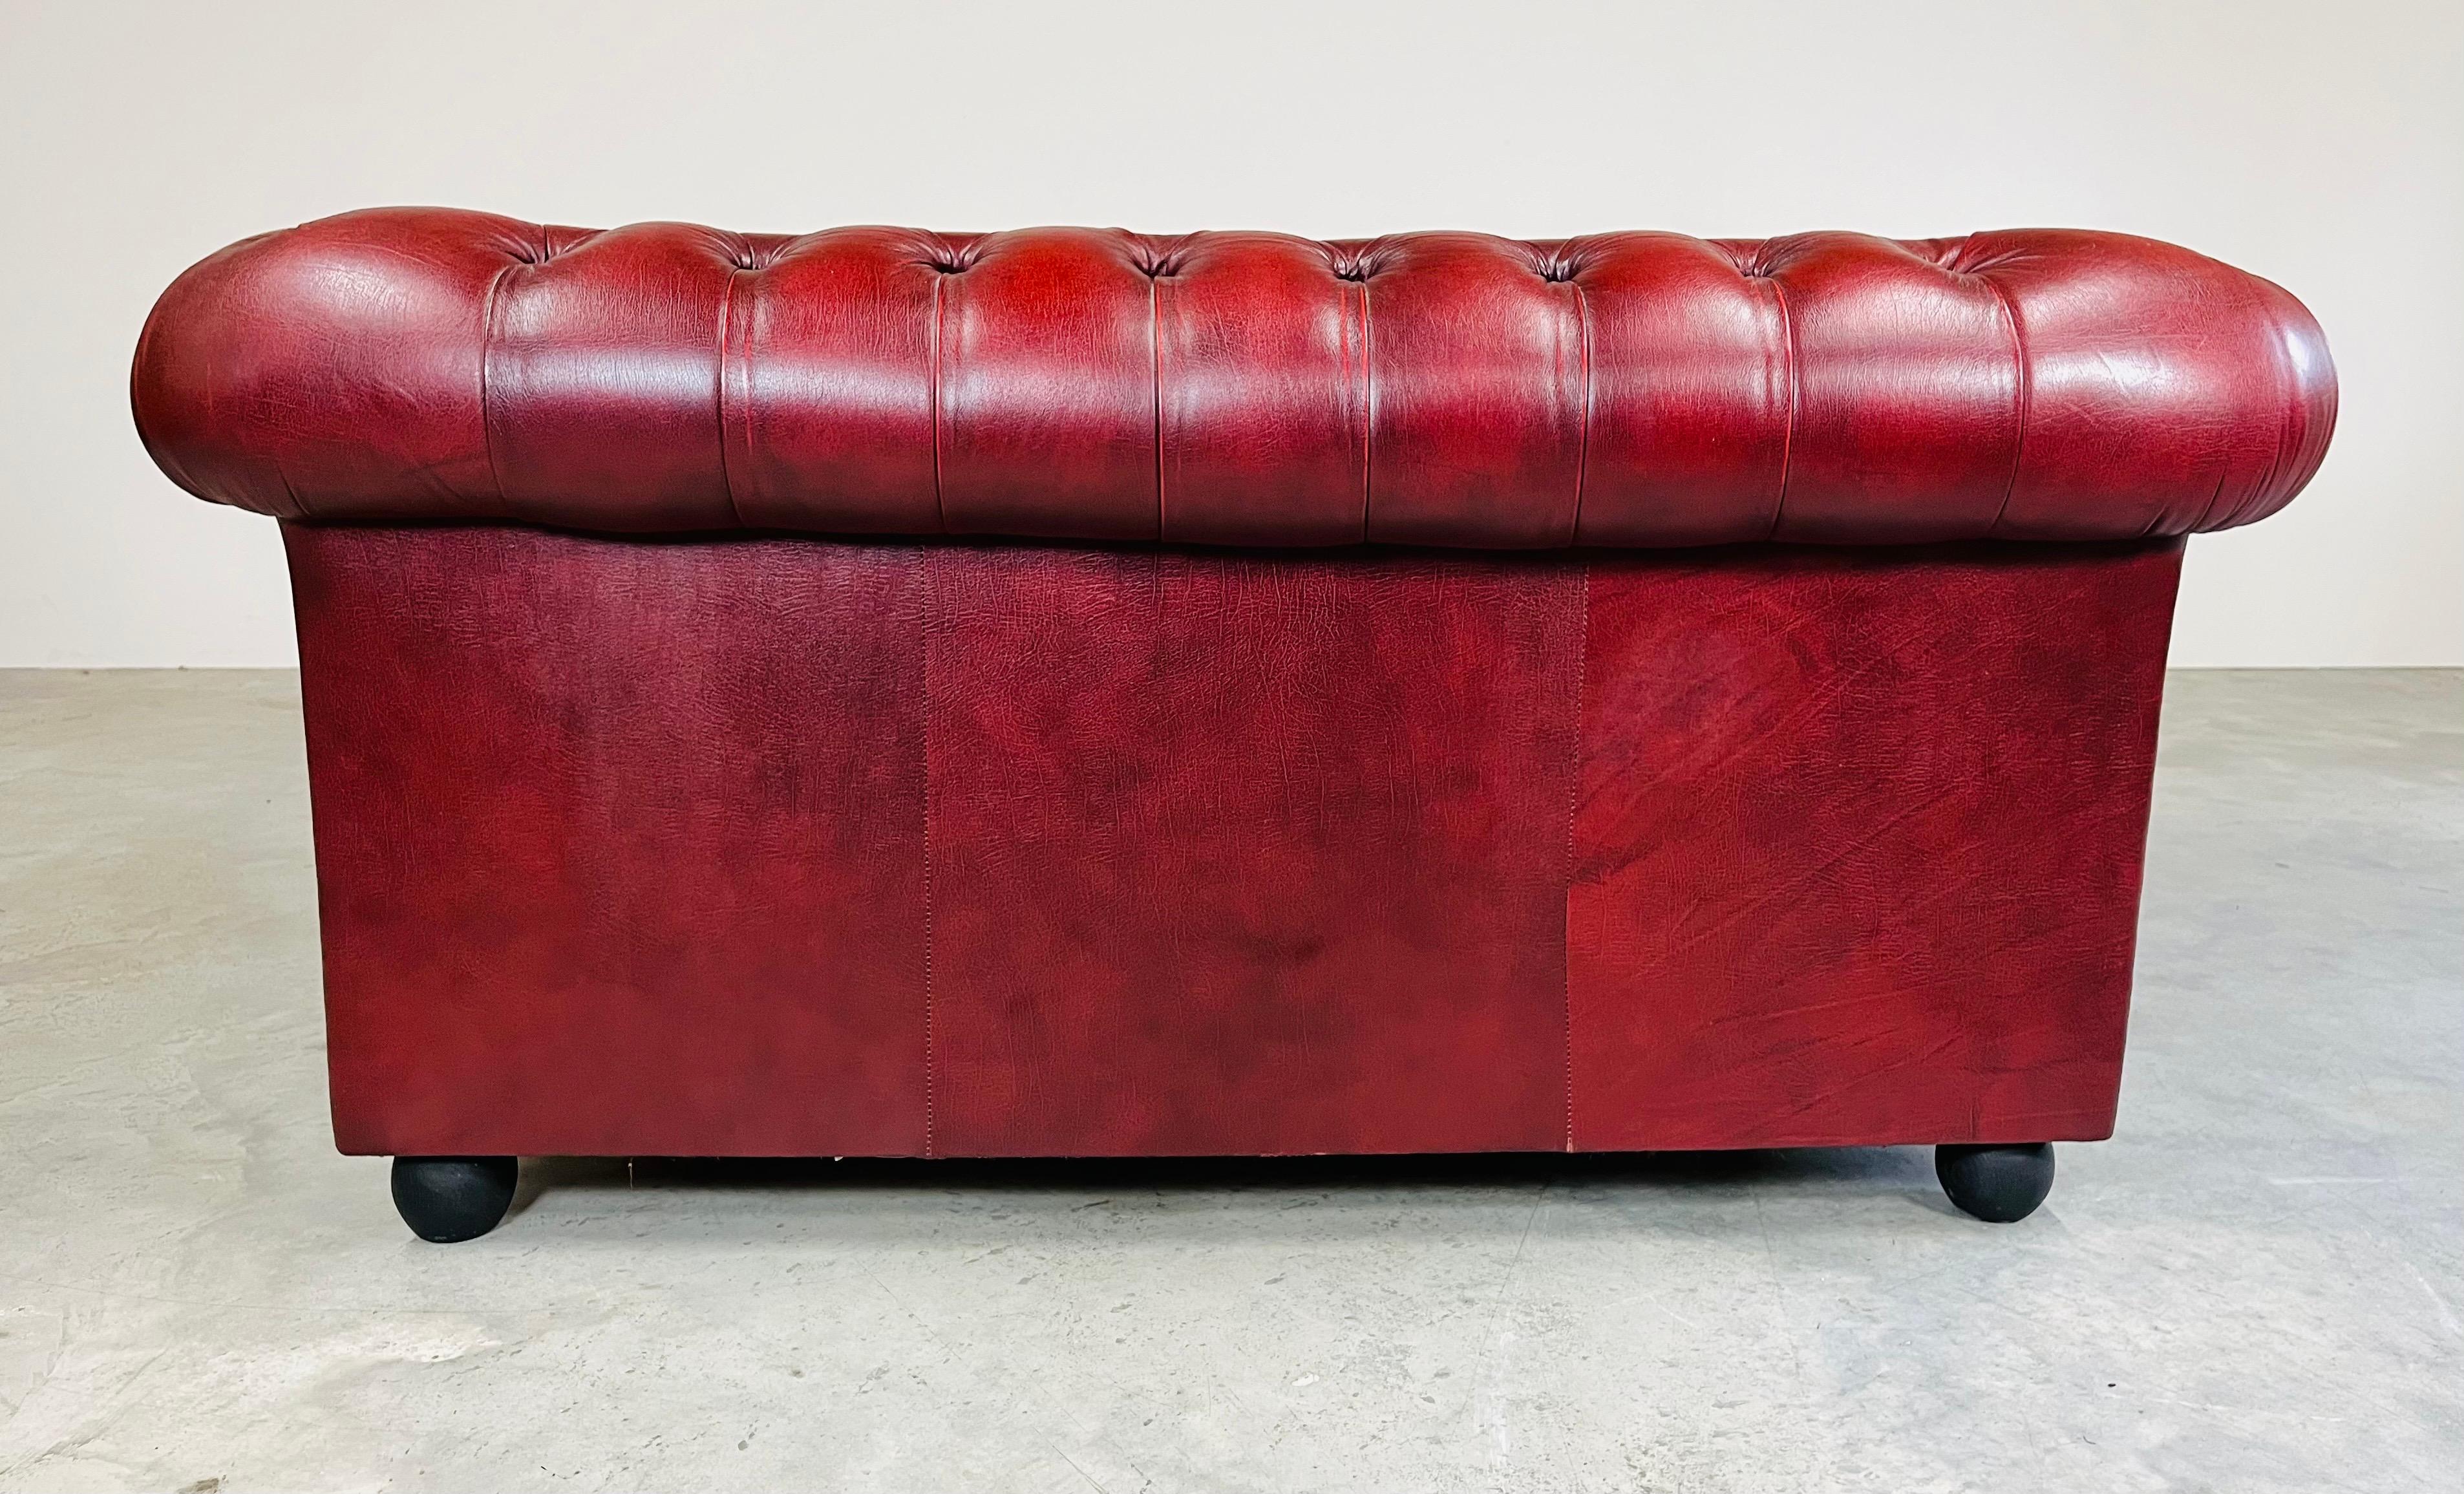 20th Century Oxblood Chesterfield Tufted Leather Love Seat Sofa -Great Britain Circa 1970